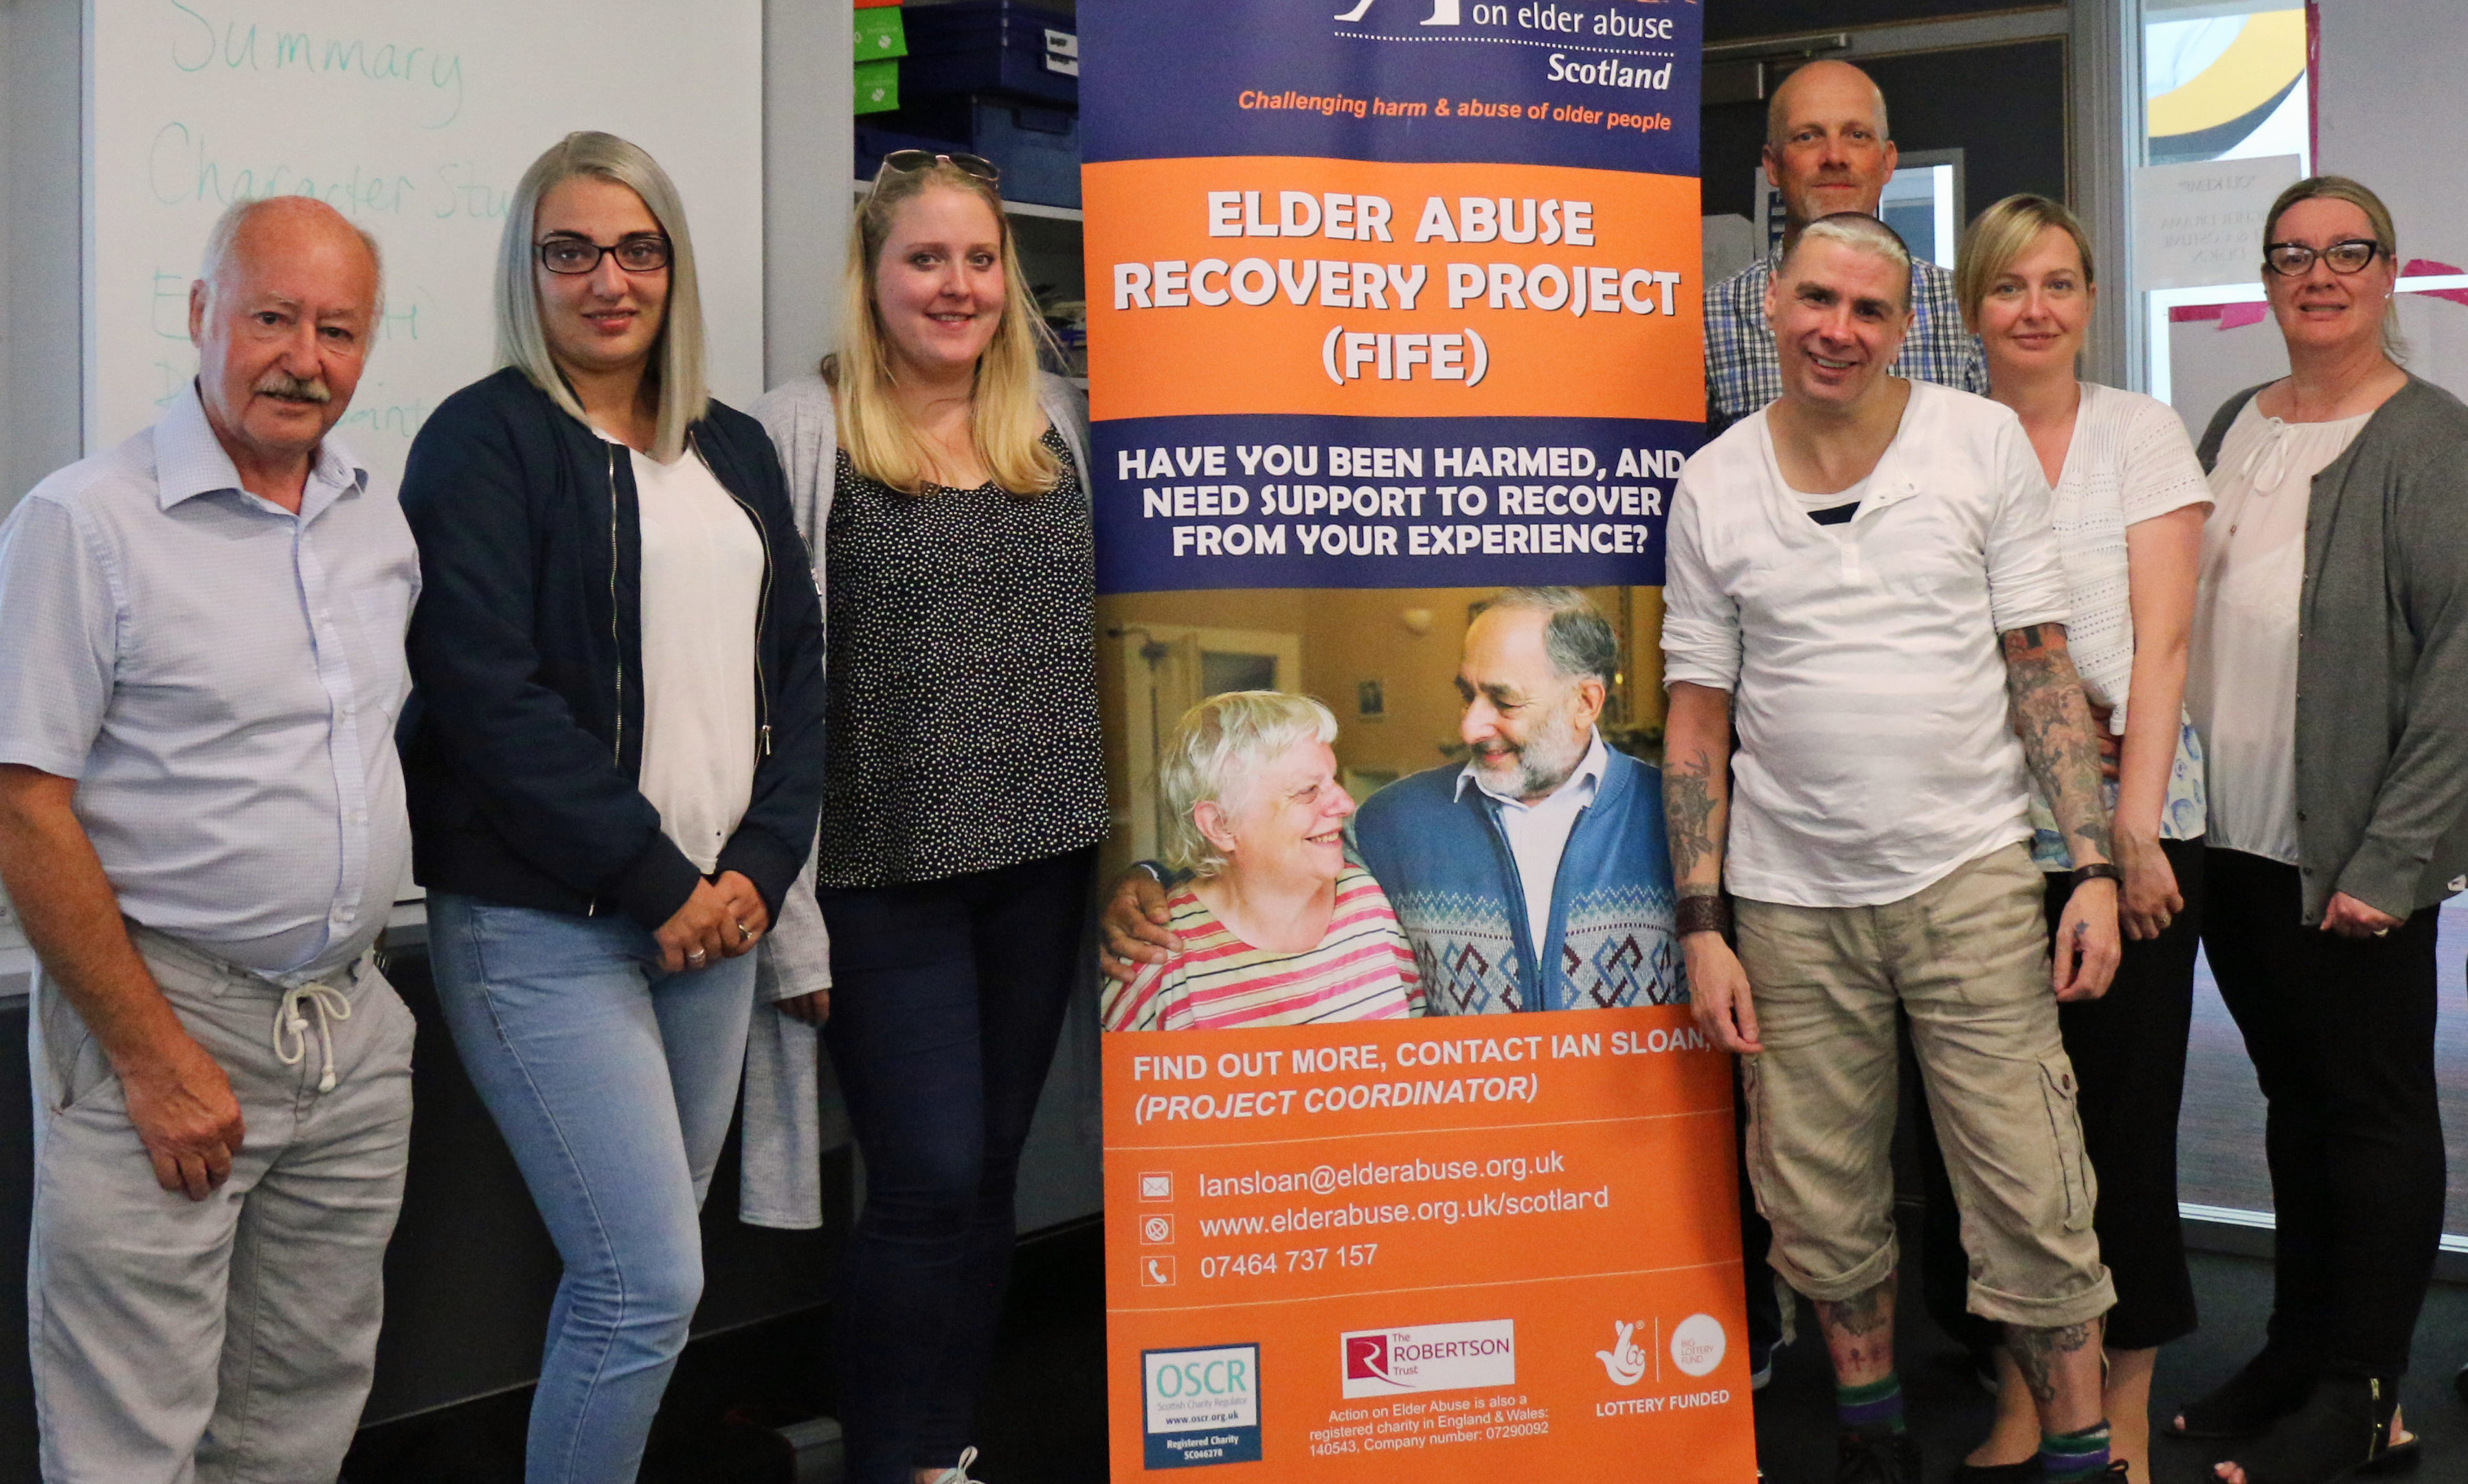 From left Ian Sloan, recovery project coordinator; and volunteers Shona Winsborough, Isobel Nunn, Steven Malcolm, Rhona Shearer and Jackie Mullen, with Brain Rapley, service coordinator (at rear).